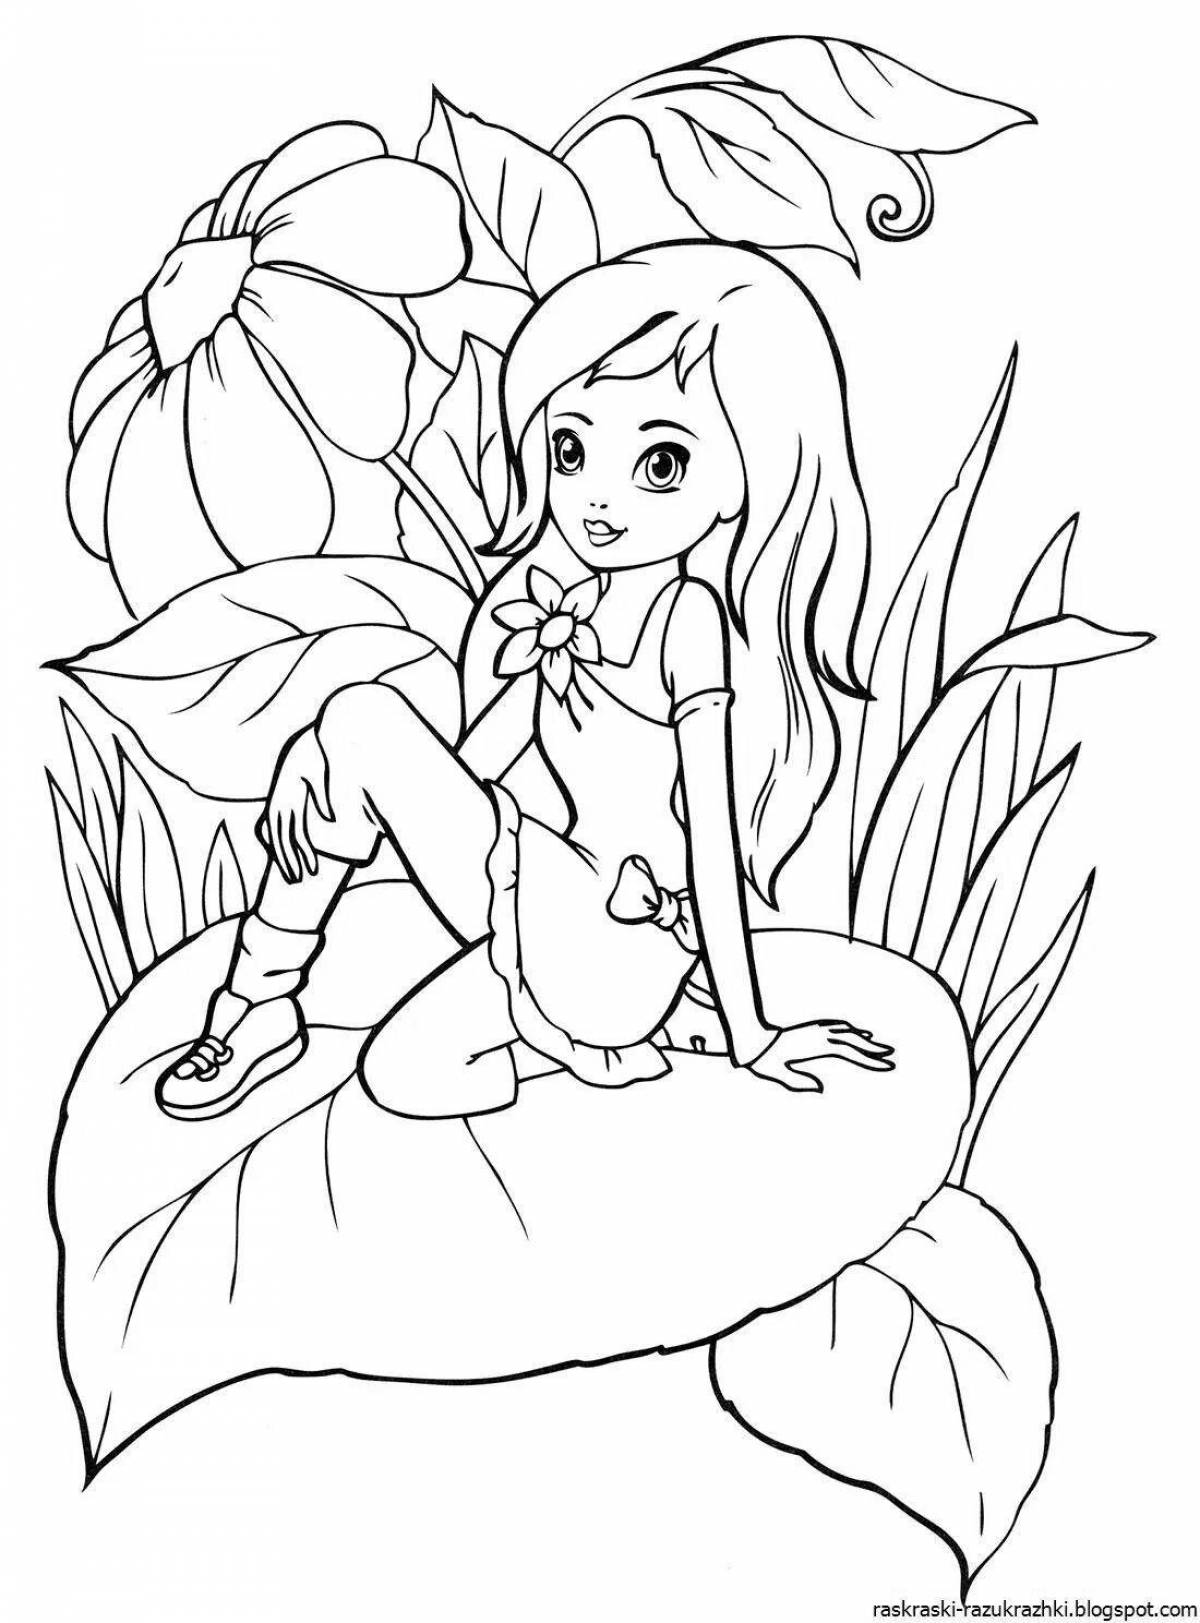 Shining fairy coloring pages for kids 5-6 years old